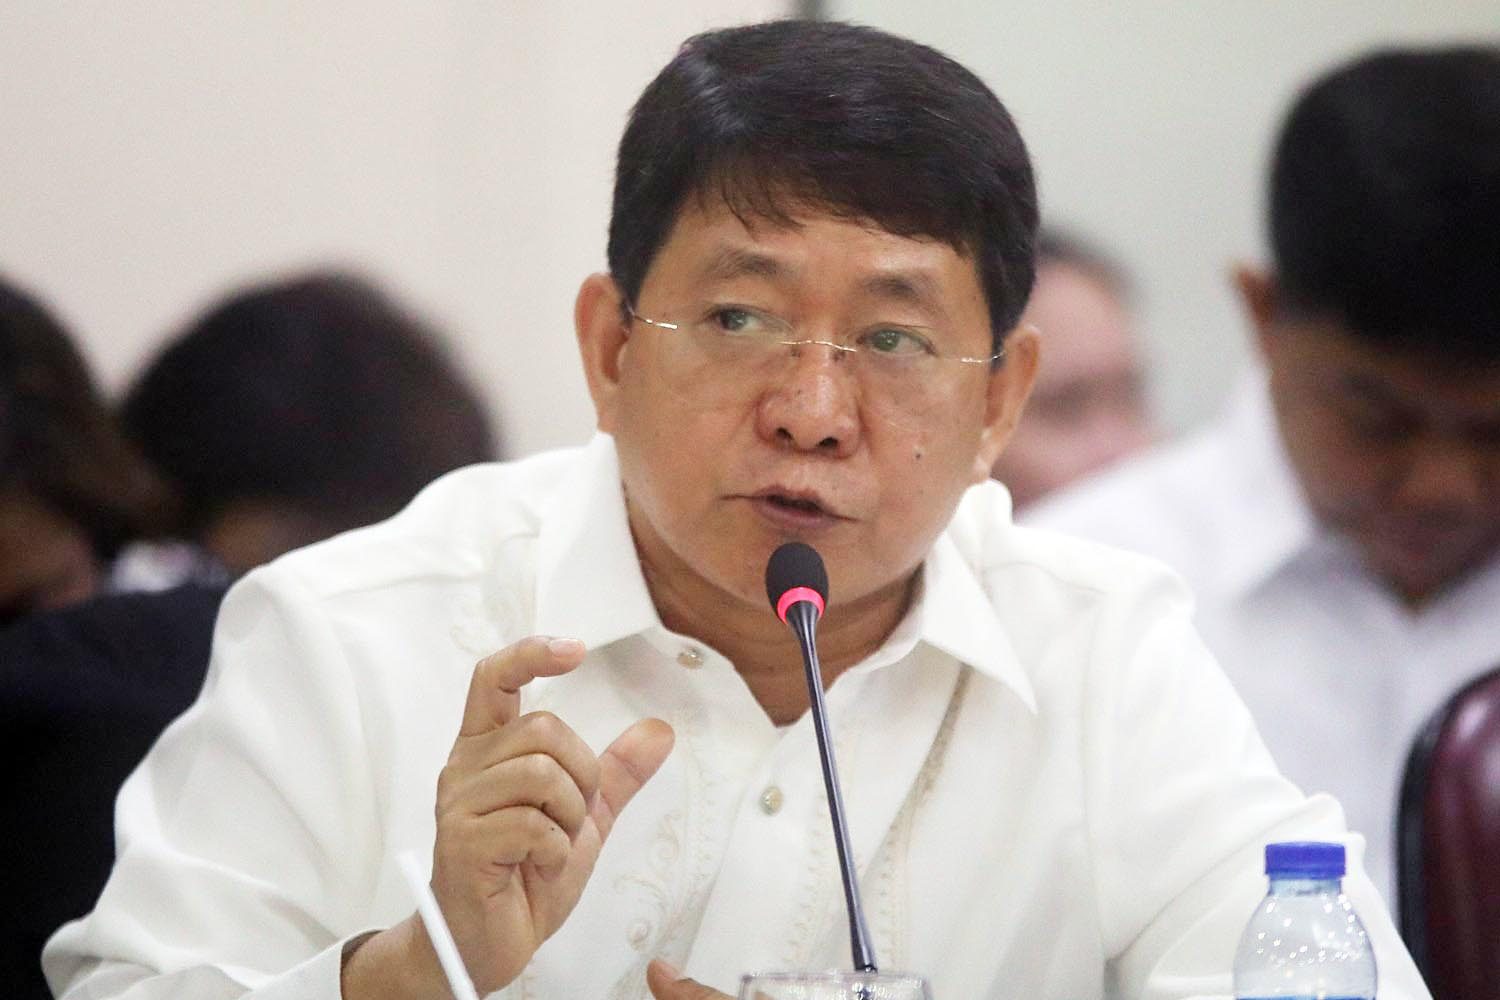 Año: LGUs may declare ECQs in towns, barangays with reg’l task force approval